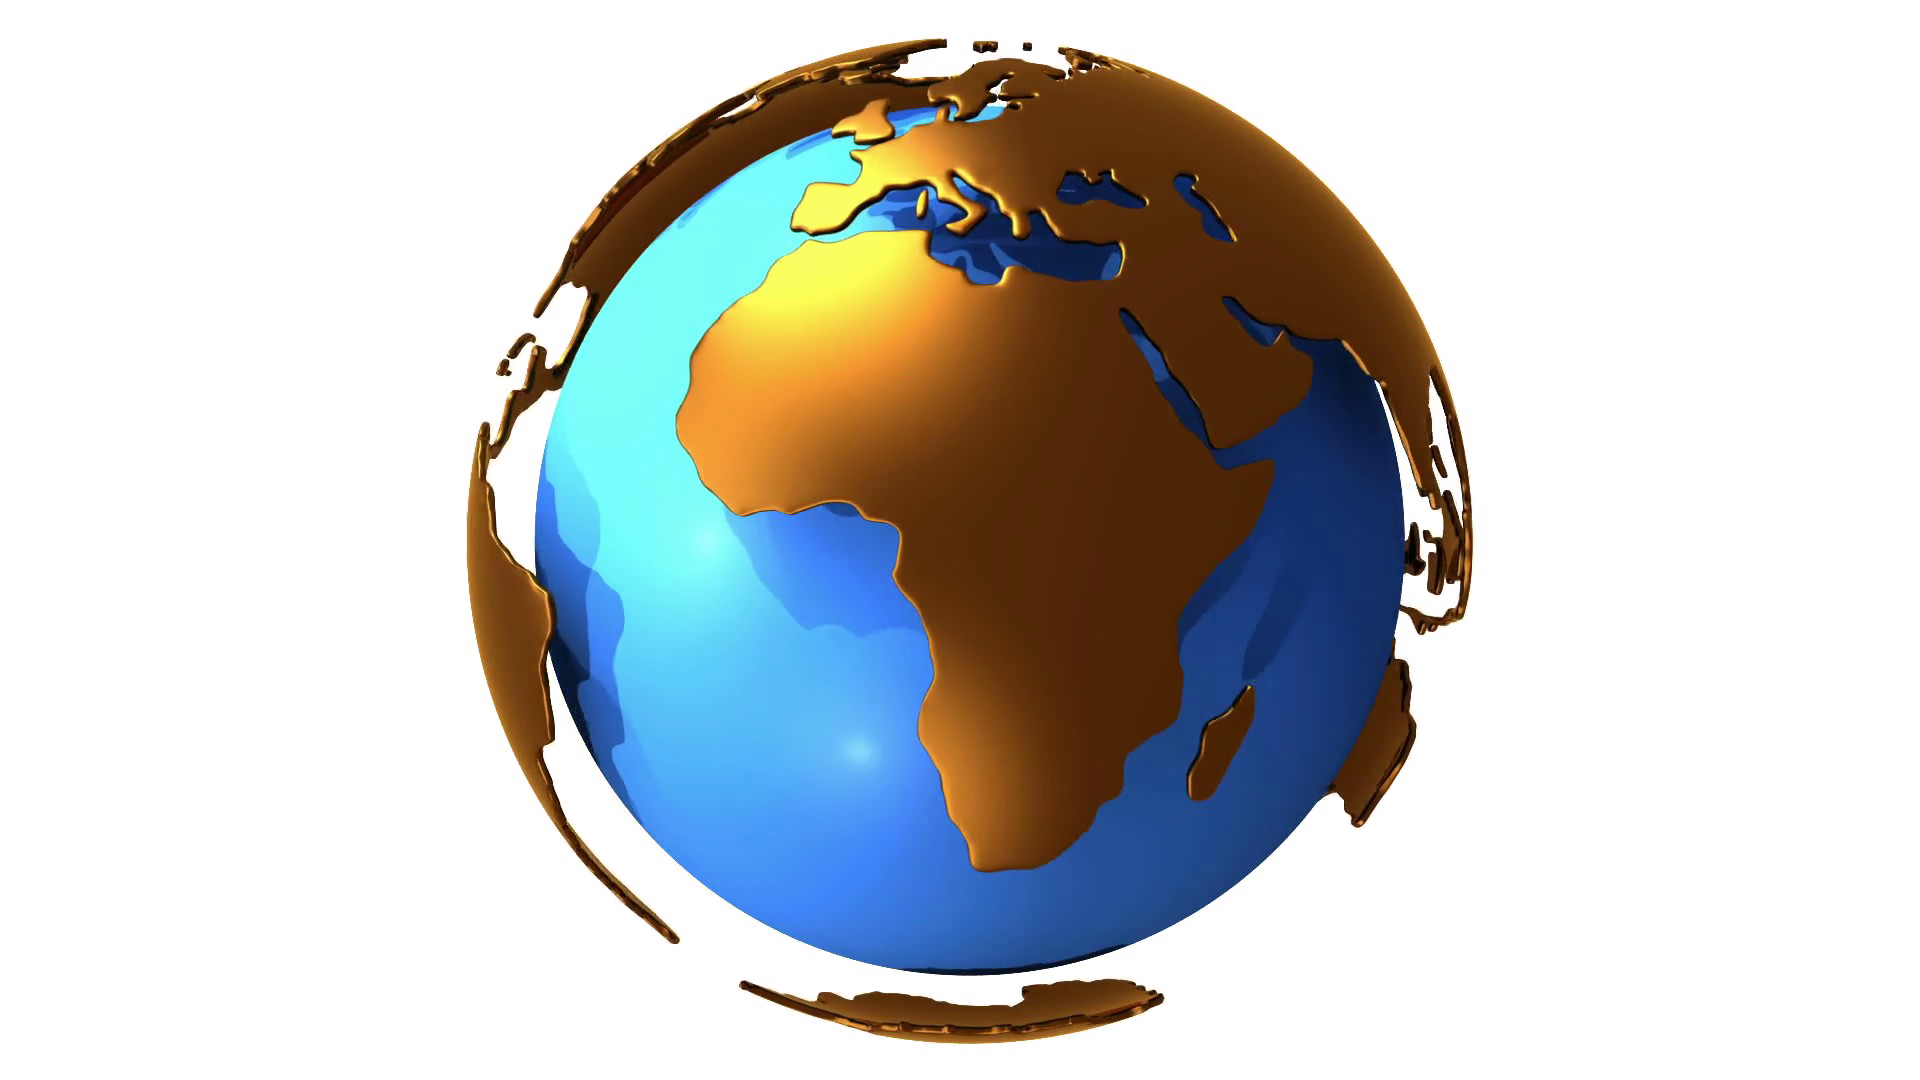 Download PNG image - Earth Globe Images Free Transparent Image HQ